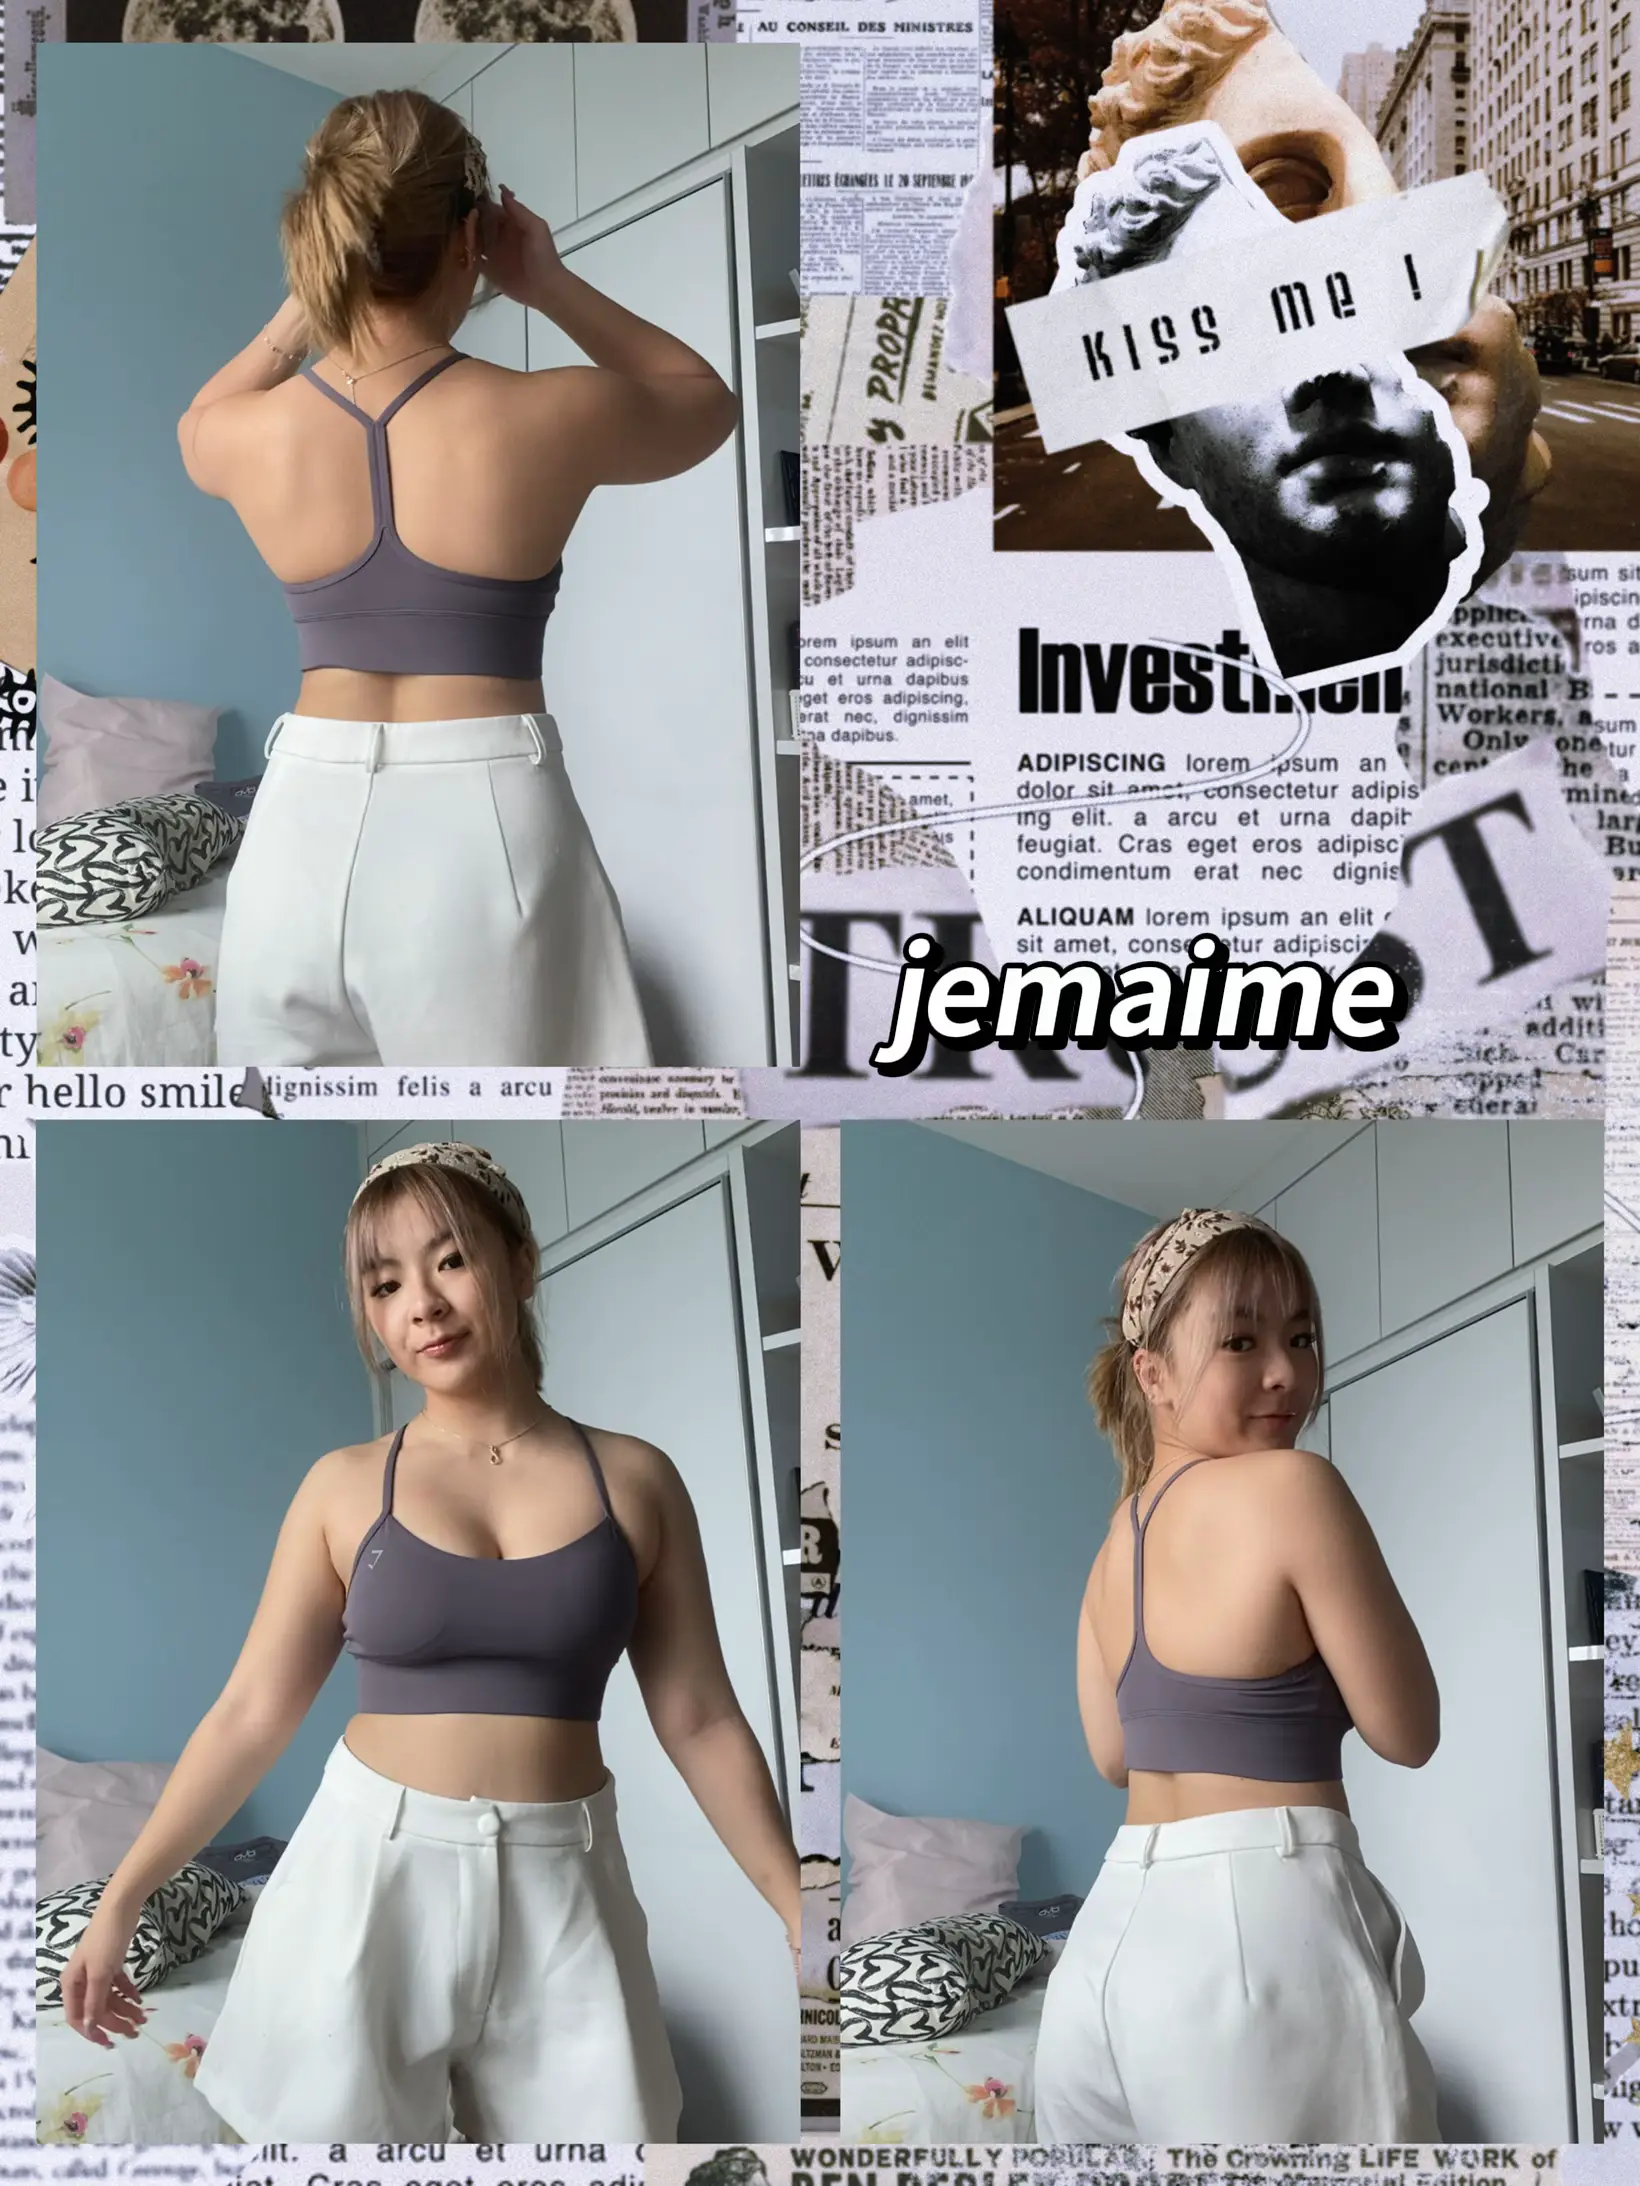 a better & cheaper dupe for the lululemon Y bra 👀🤍